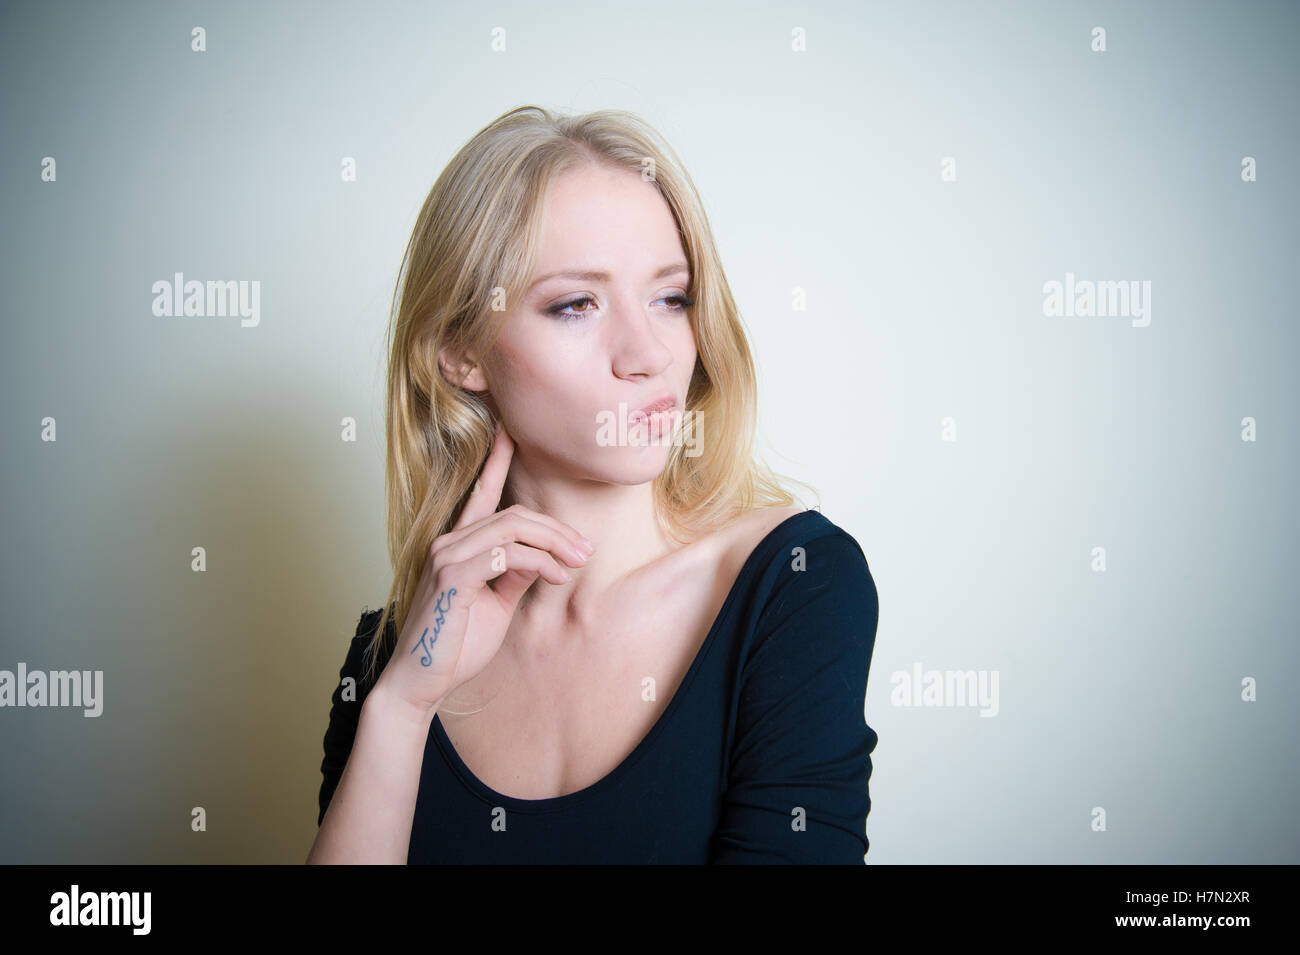 Young blond woman thoughtful looking side, portrait with copy space Stock Photo